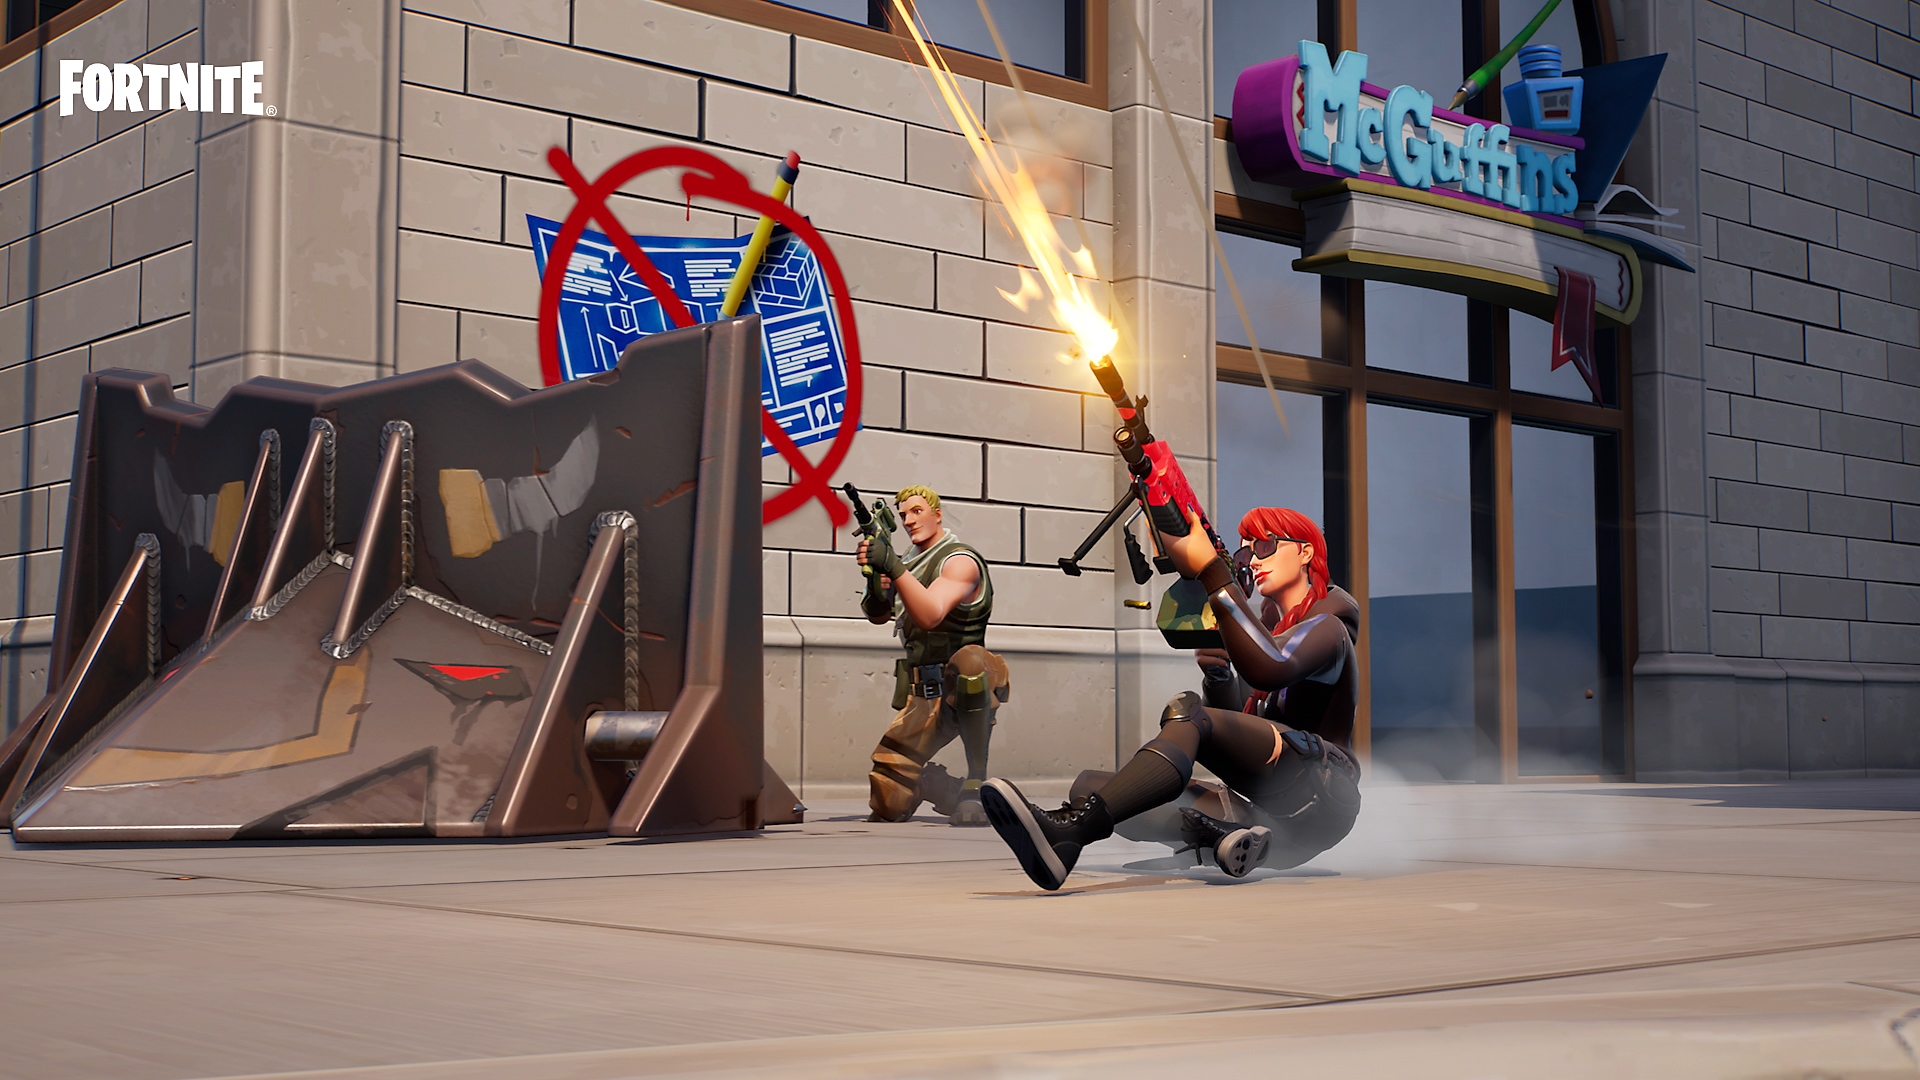 Fortnite zero build mode - characters shooting weapons